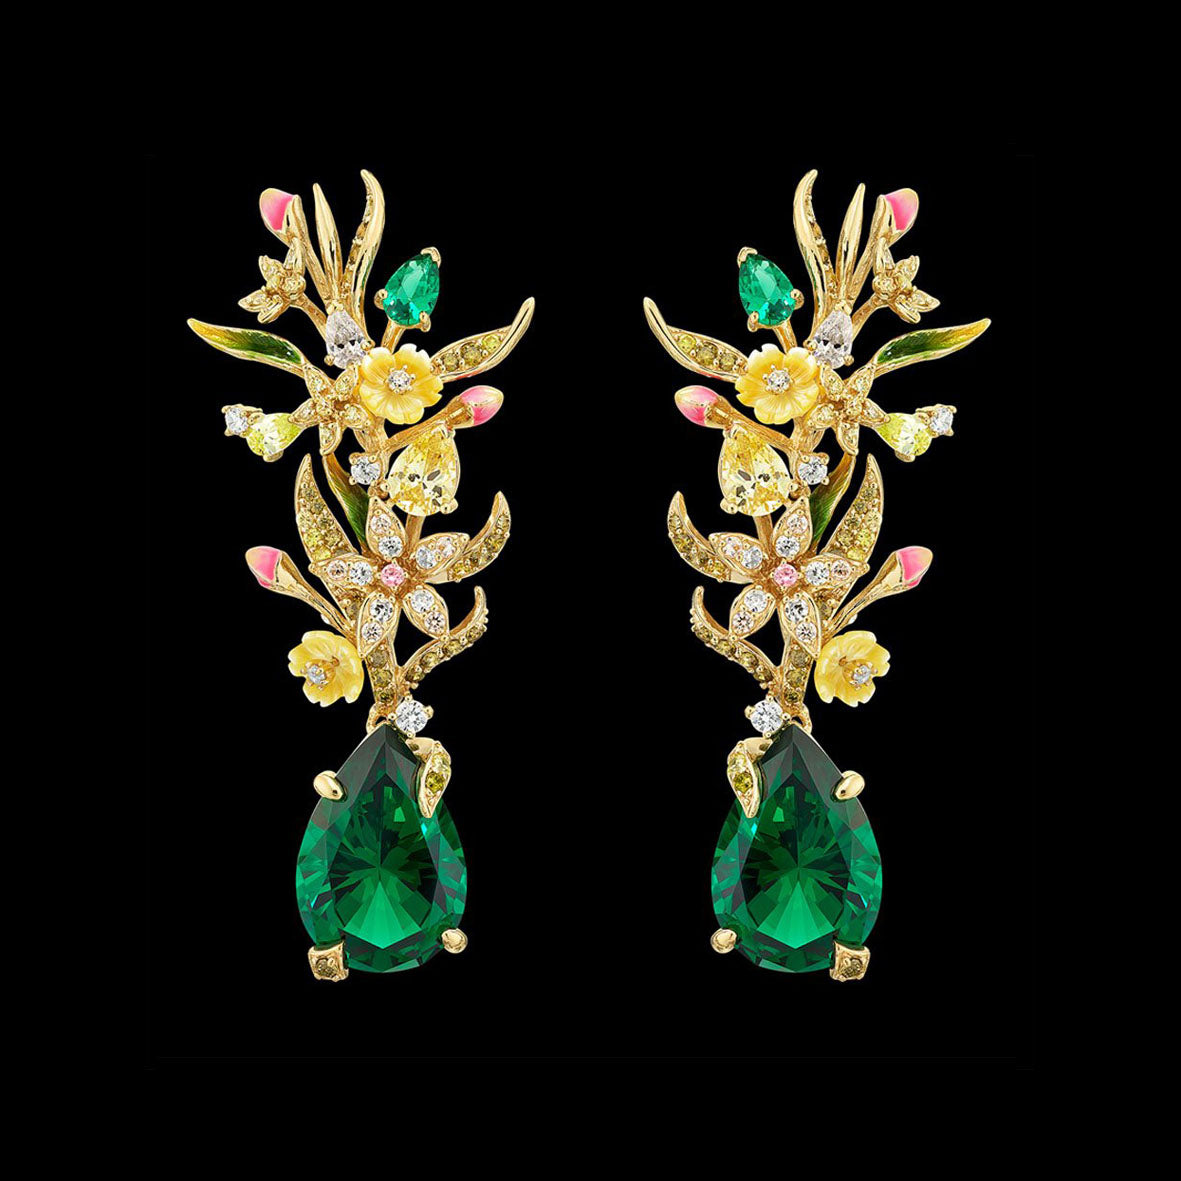 Posie Emerald Earrings, Earring, Anabela Chan Joaillerie - Fine jewelry with laboratory grown and created gemstones hand-crafted in the United Kingdom. Anabela Chan Joaillerie is the first fine jewellery brand in the world to champion laboratory-grown and created gemstones with high jewellery design, artisanal craftsmanship and a focus on ethical and sustainable innovations.